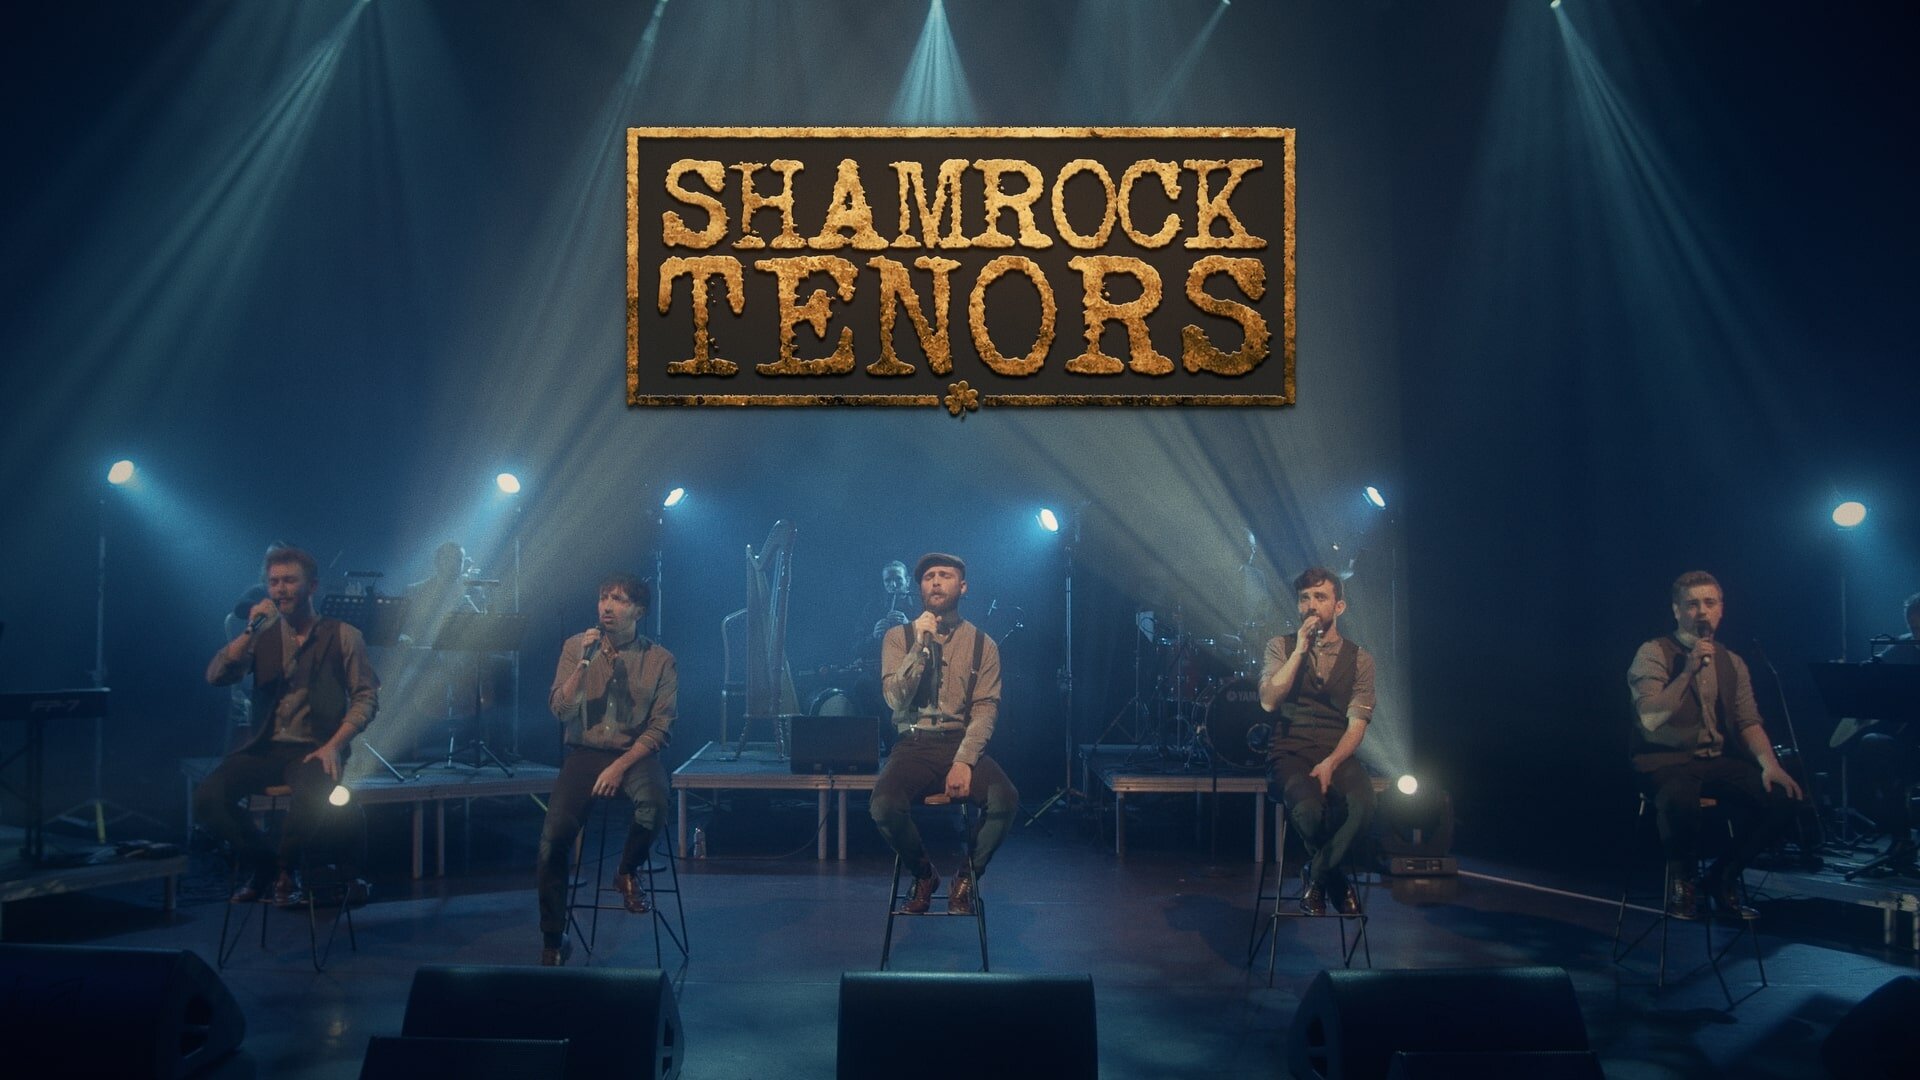 Shamrock Tenors on stage